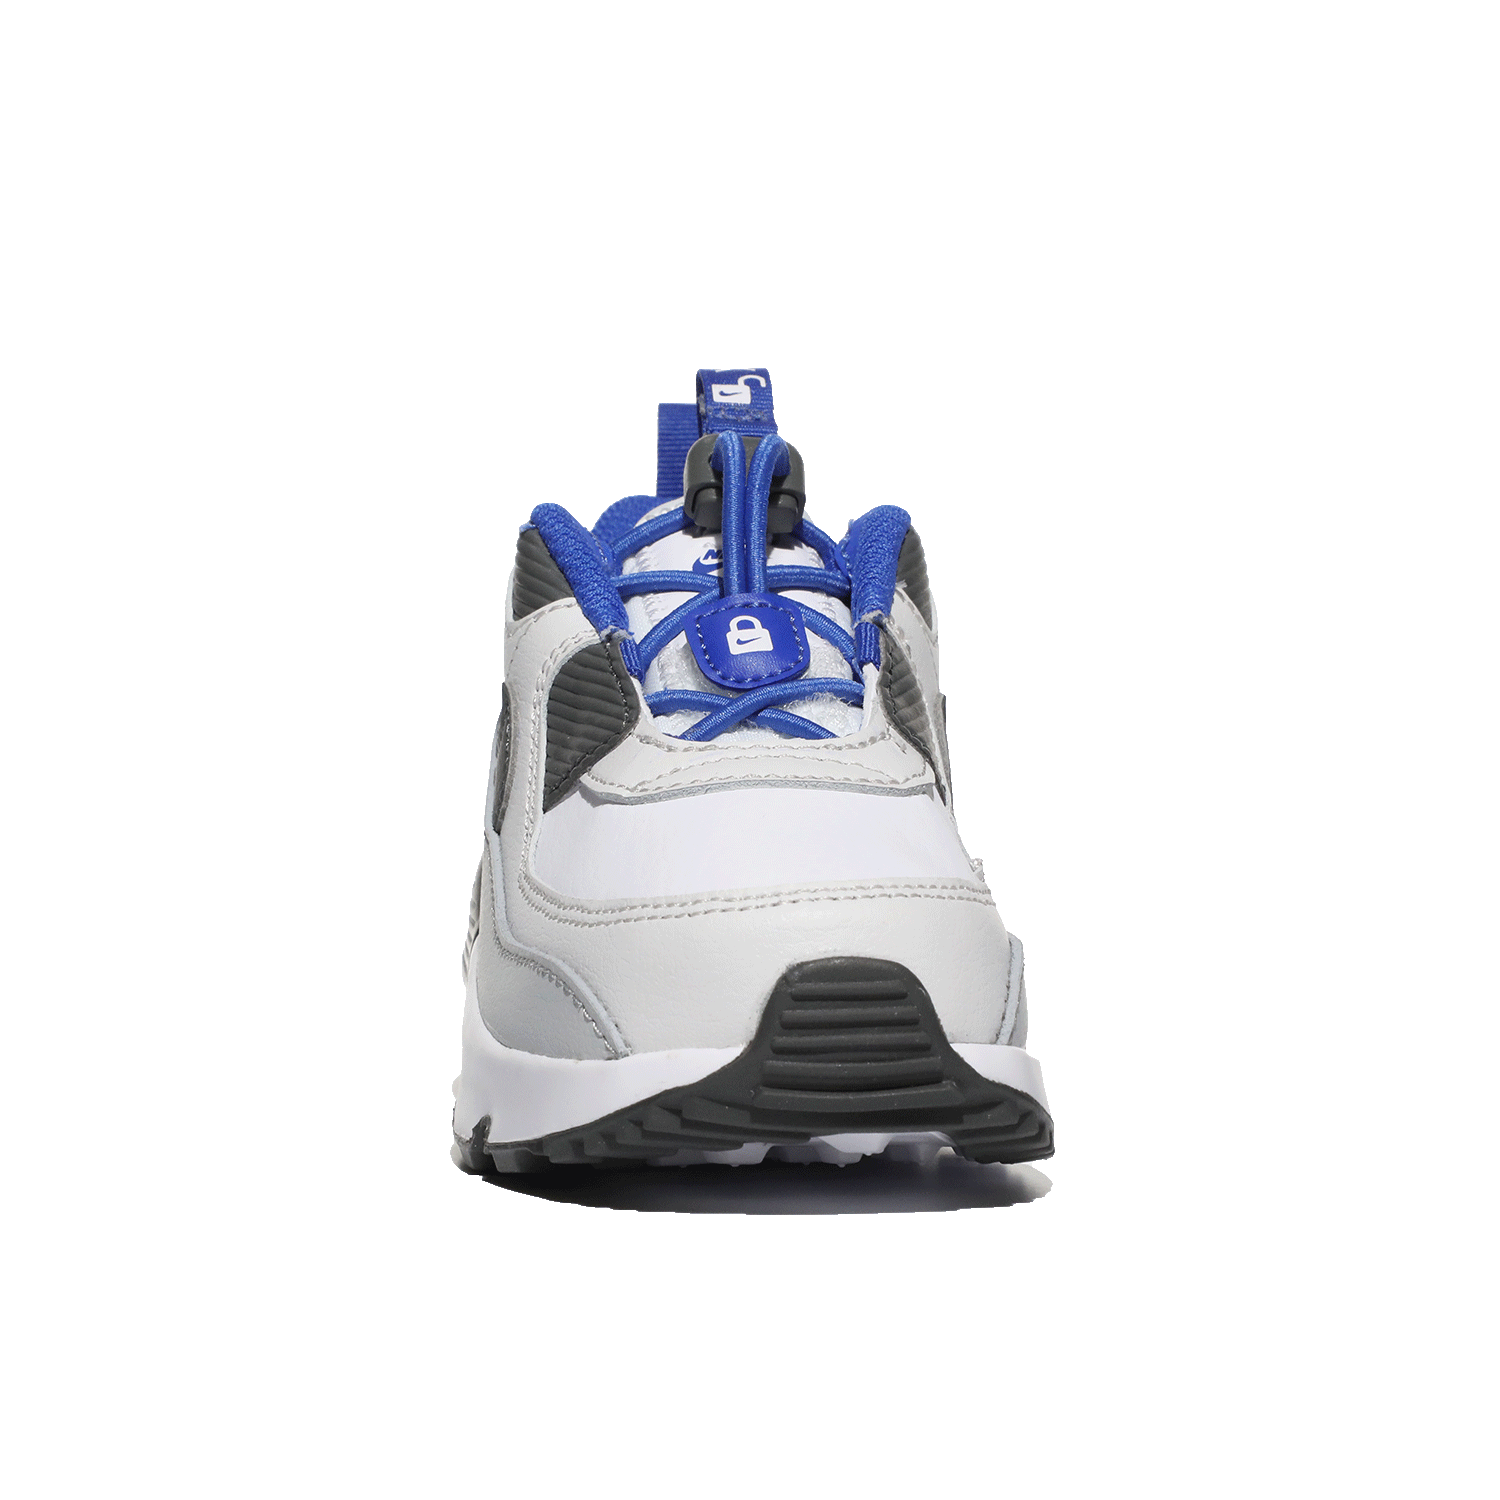 Image 4 of Air Max 90 Toggle (Infant/Toddler)